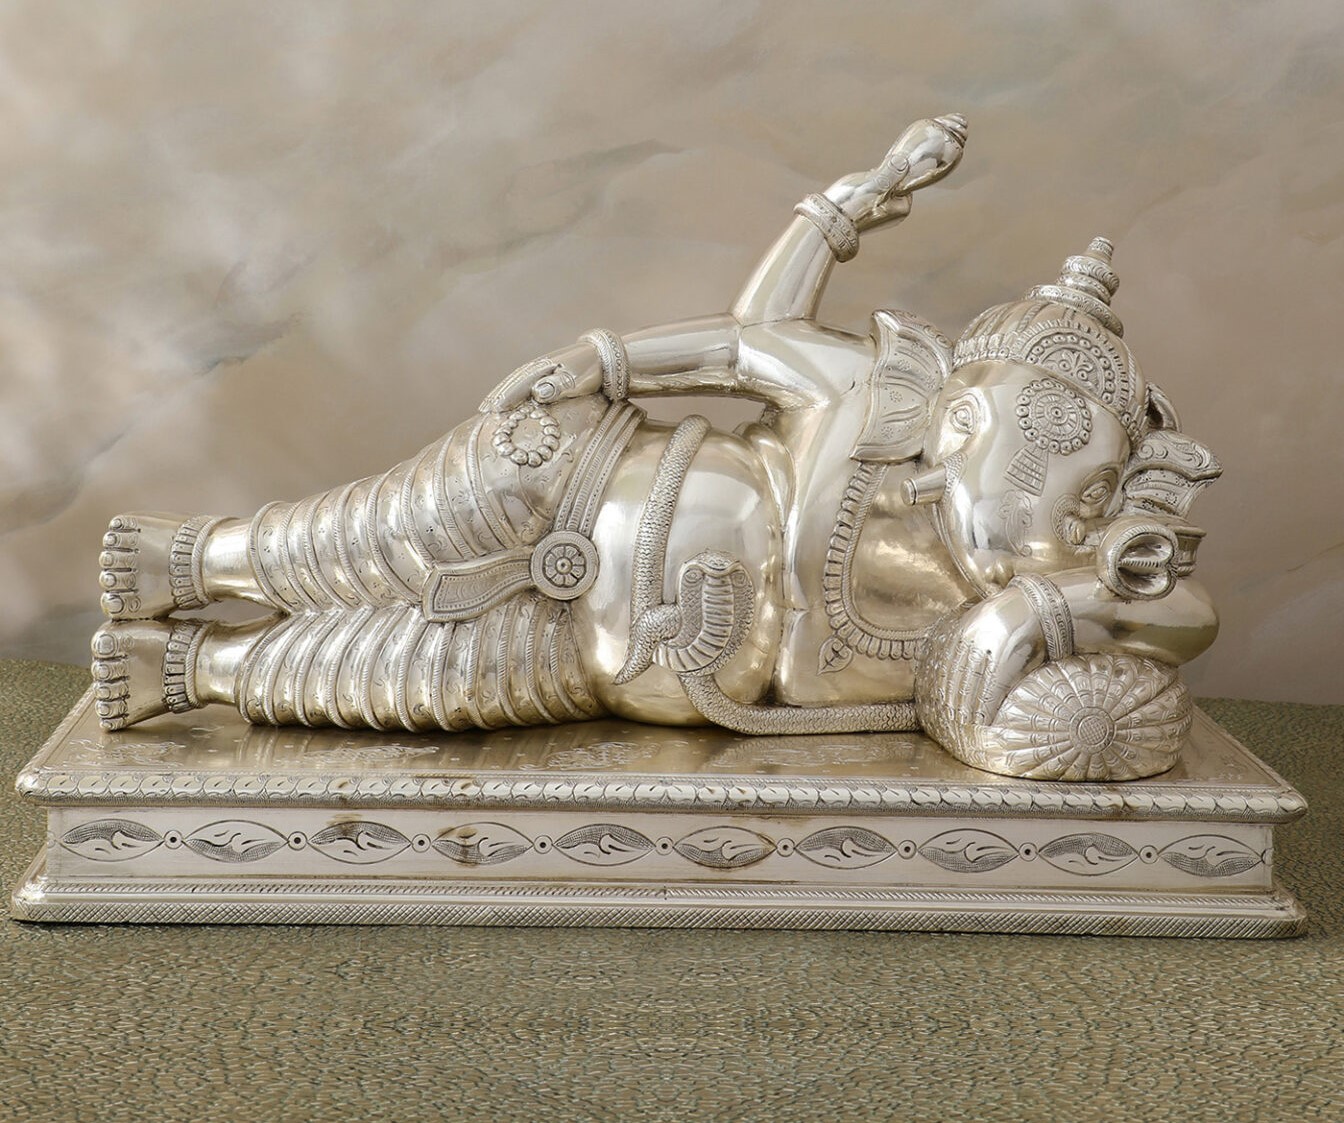 Indian Silver God Idols - An exquisite representation of divine devotion and artistry, showcasing the timeless beauty of Indian craftsmanship